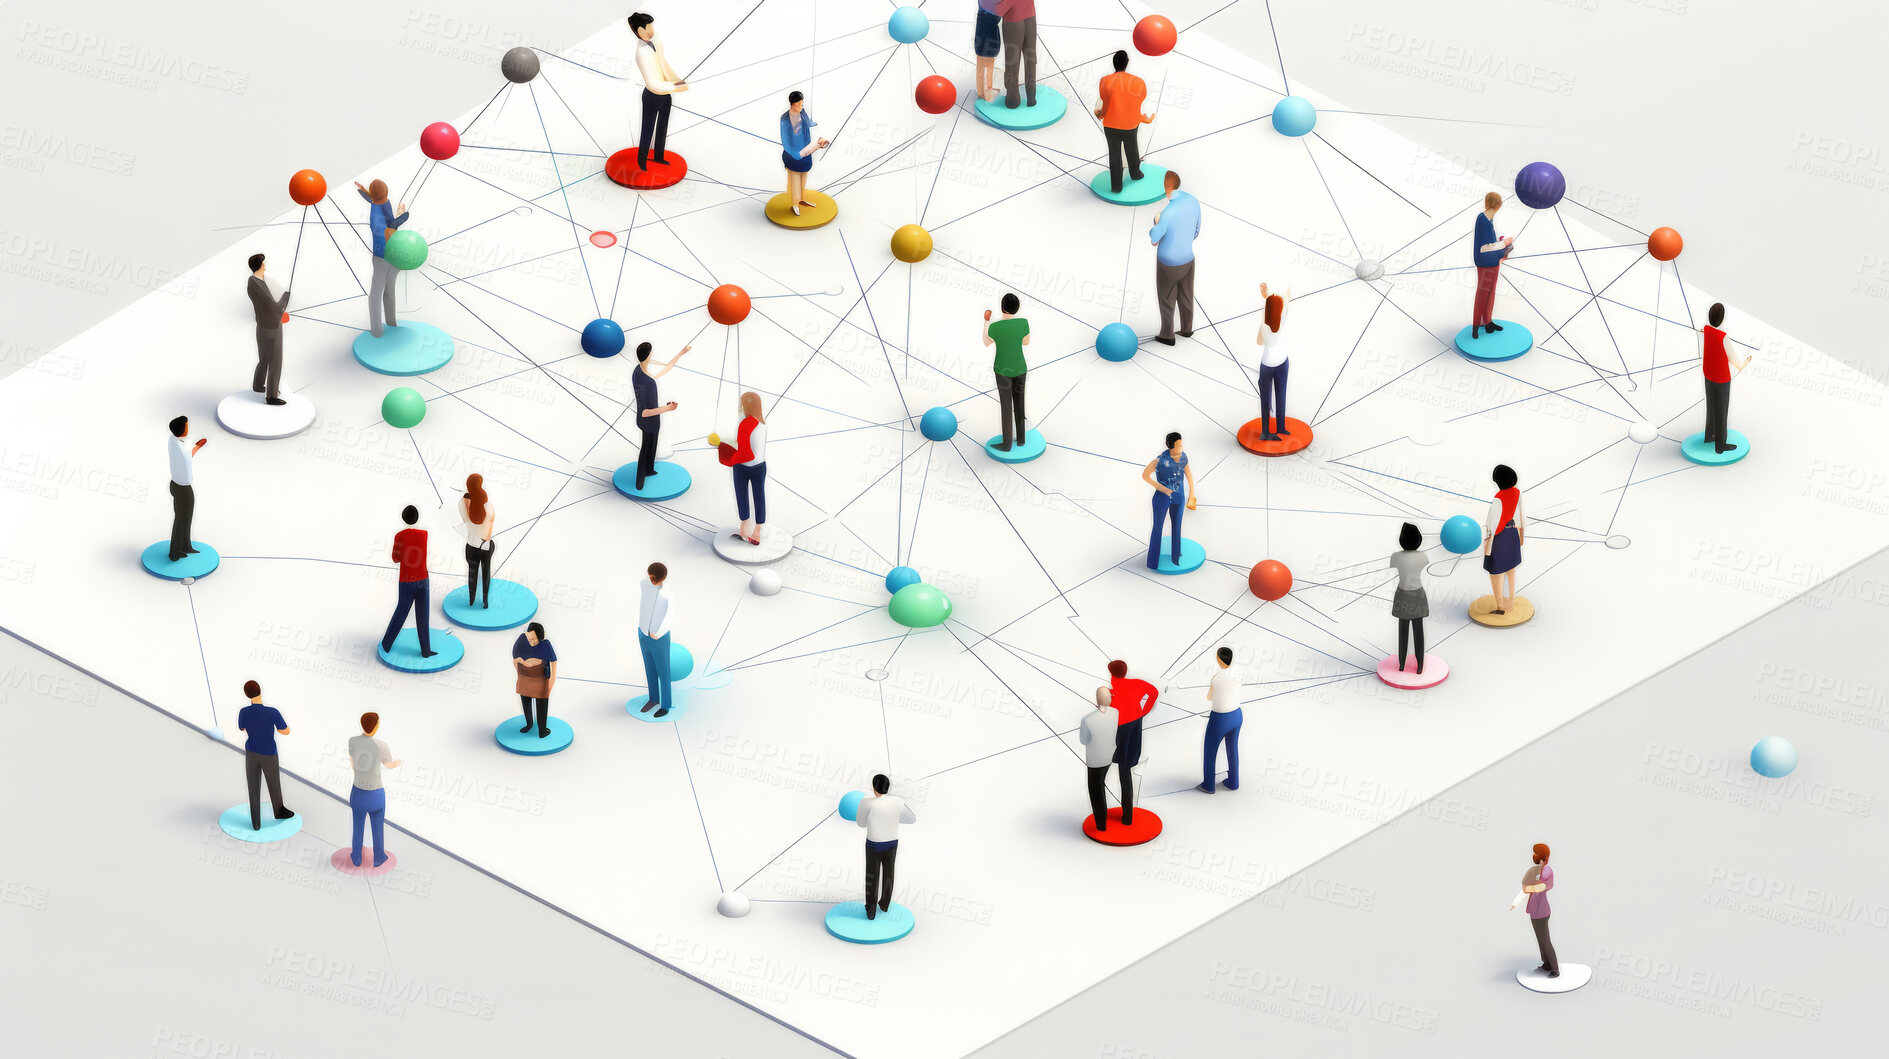 Buy stock photo View of a crowd with a network of connections. Big data, smart city, wifi concept.